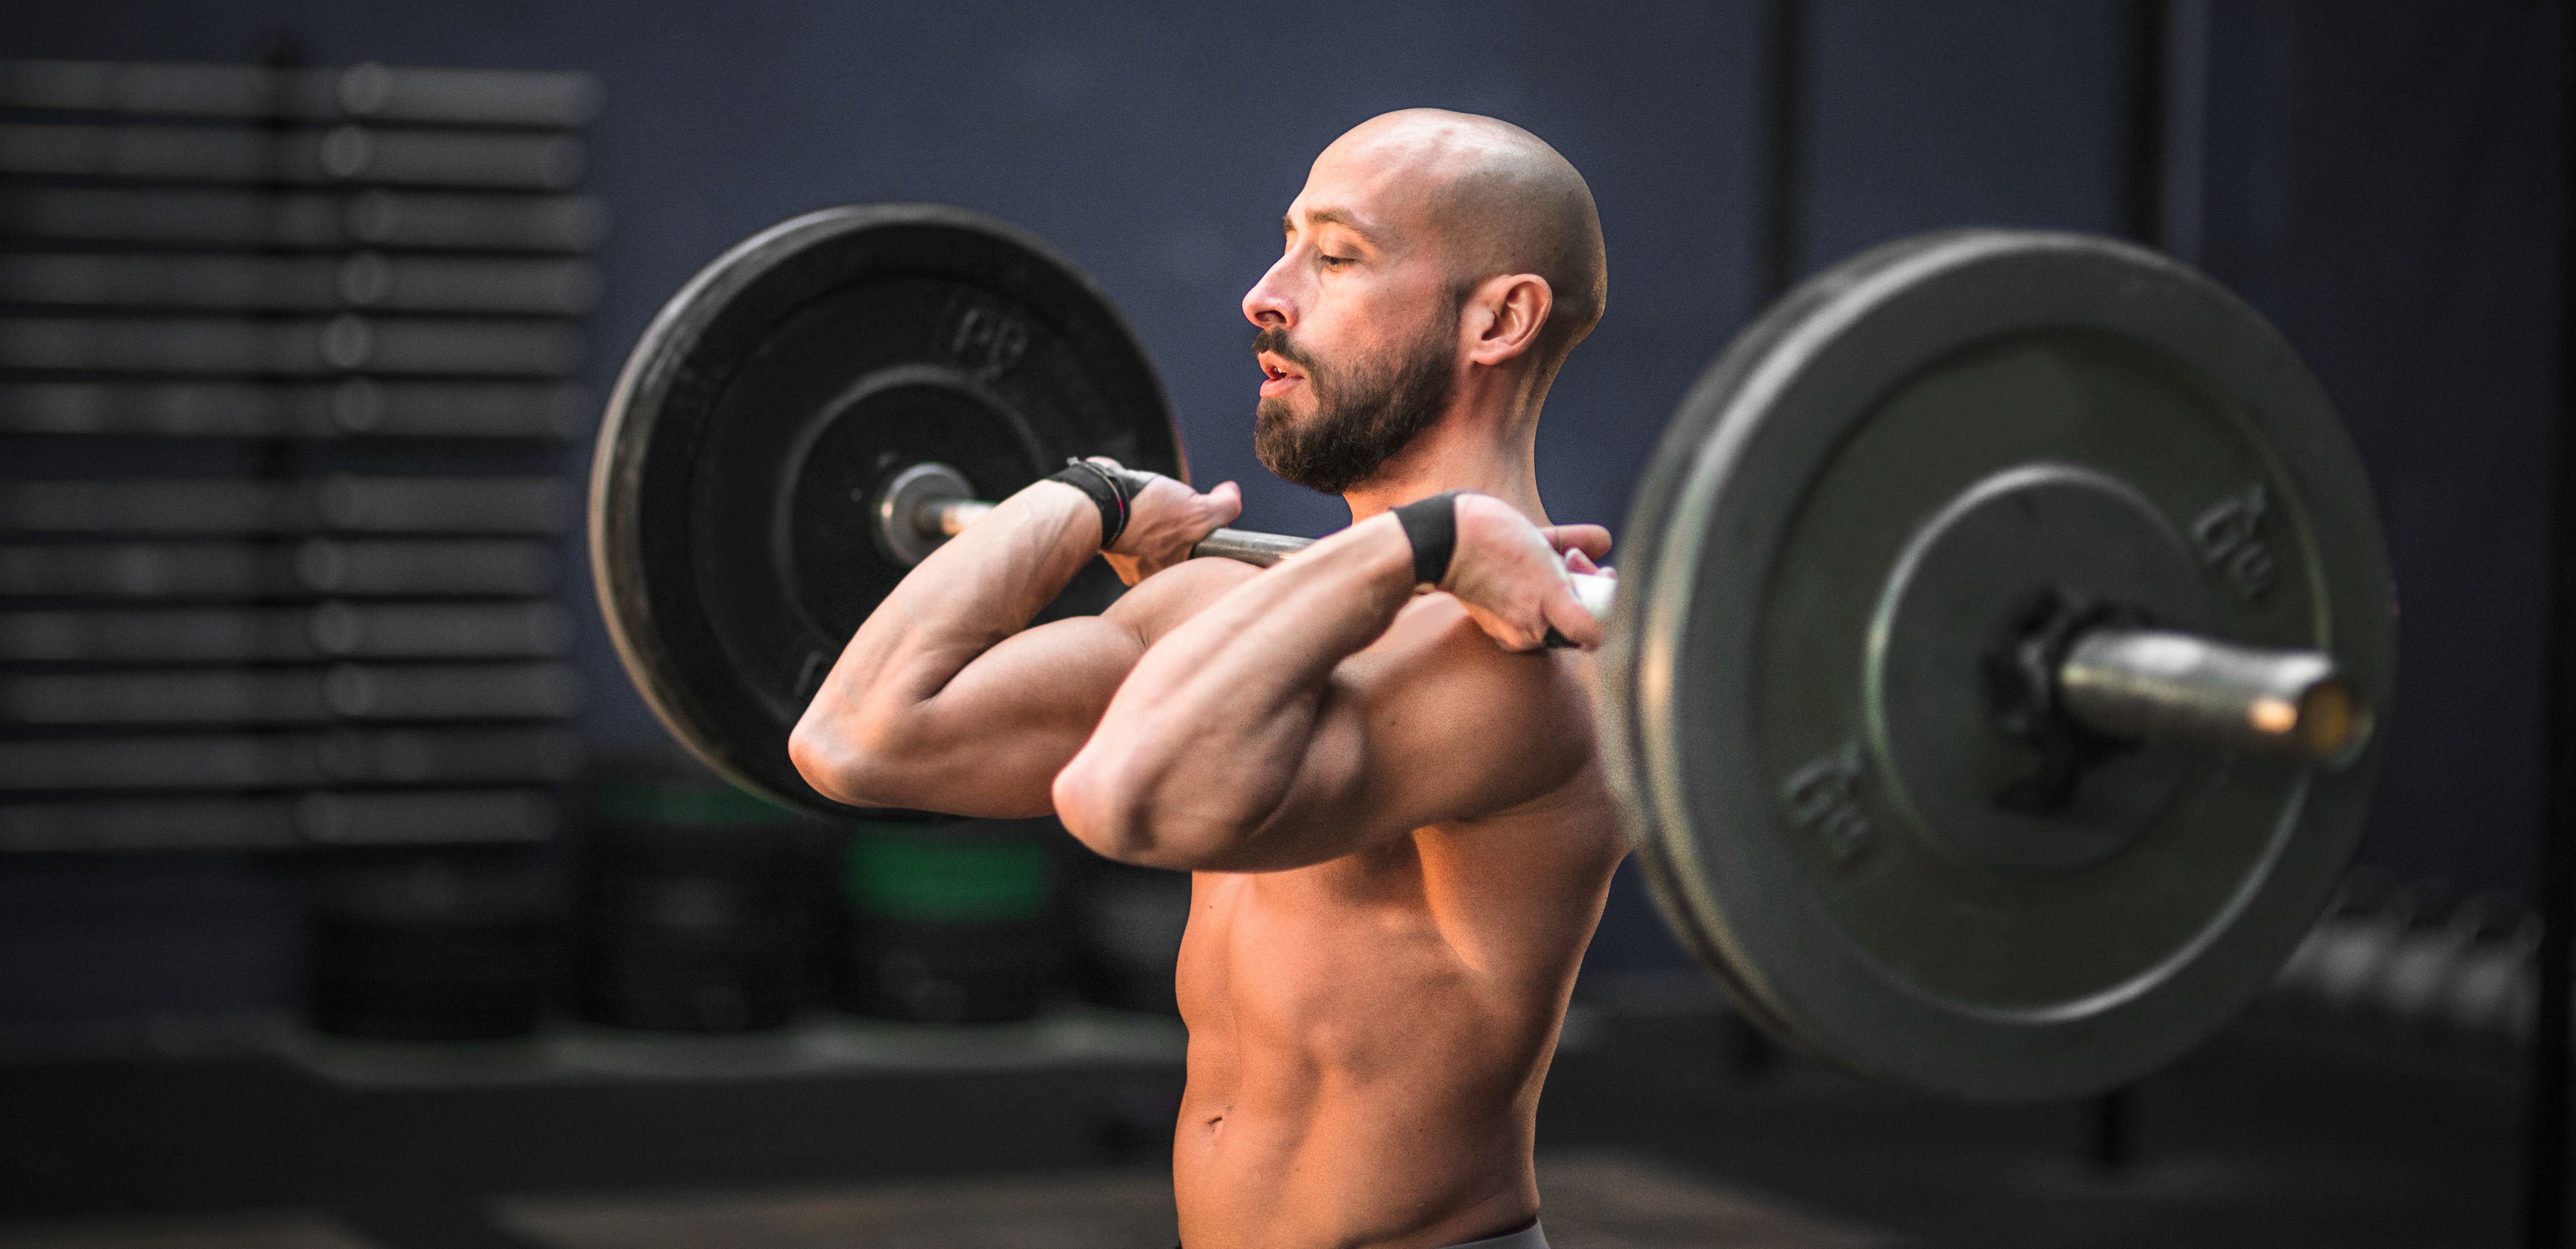 The Beginner's Guide to Olympic Lifting - How to Do Olympic Lifts